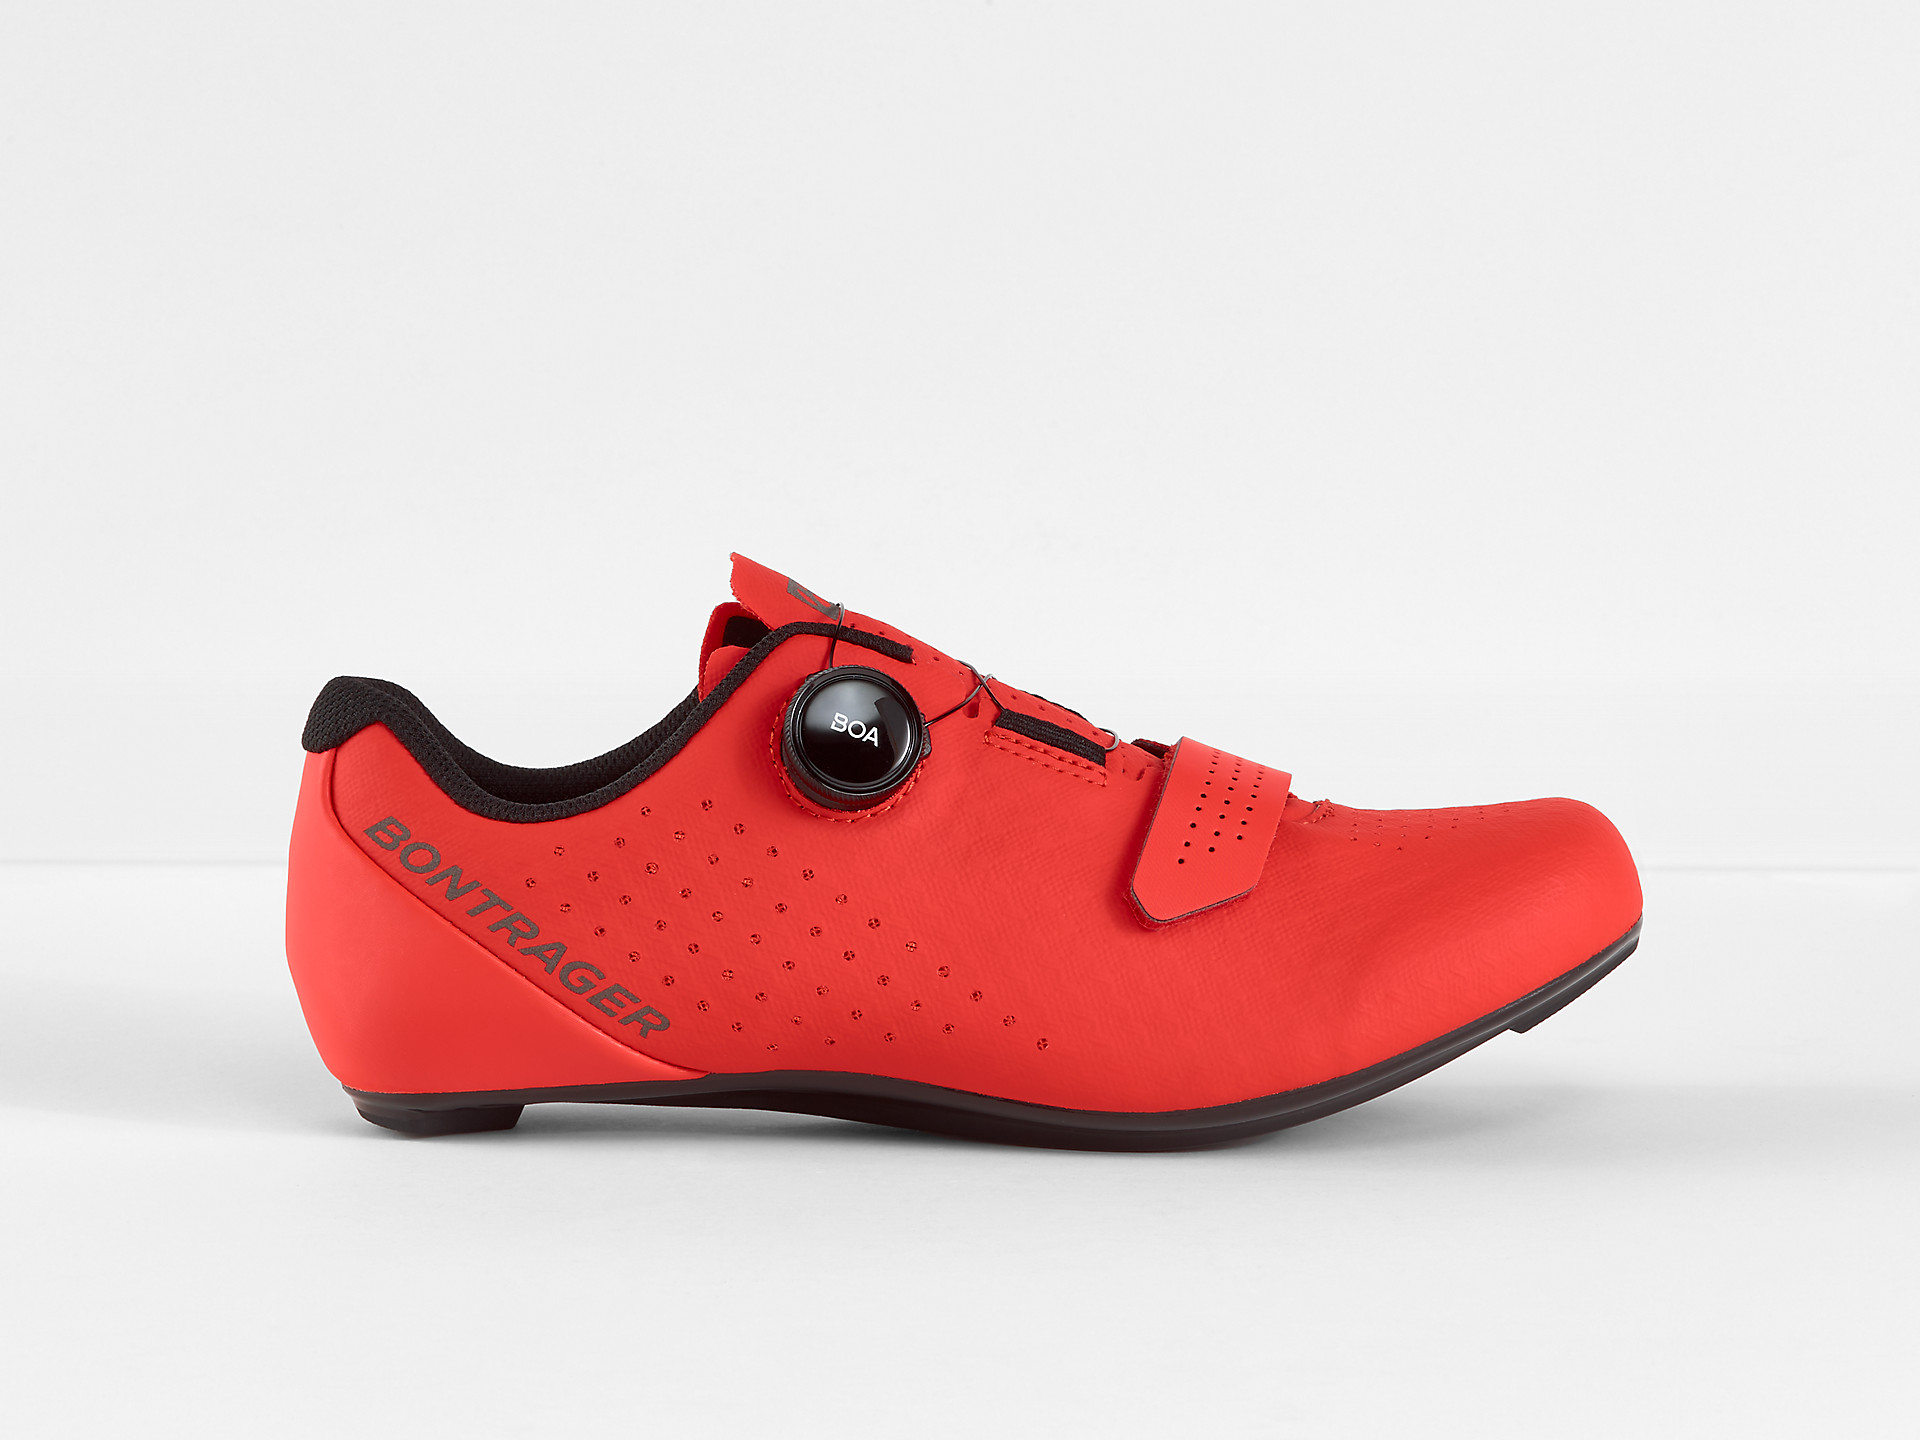 <a href="https://cycles-clement.be/product/chaussure-bont-circuit-race-41-red/">CHAUSSURE BONT CIRCUIT RACE 41 RED</a>